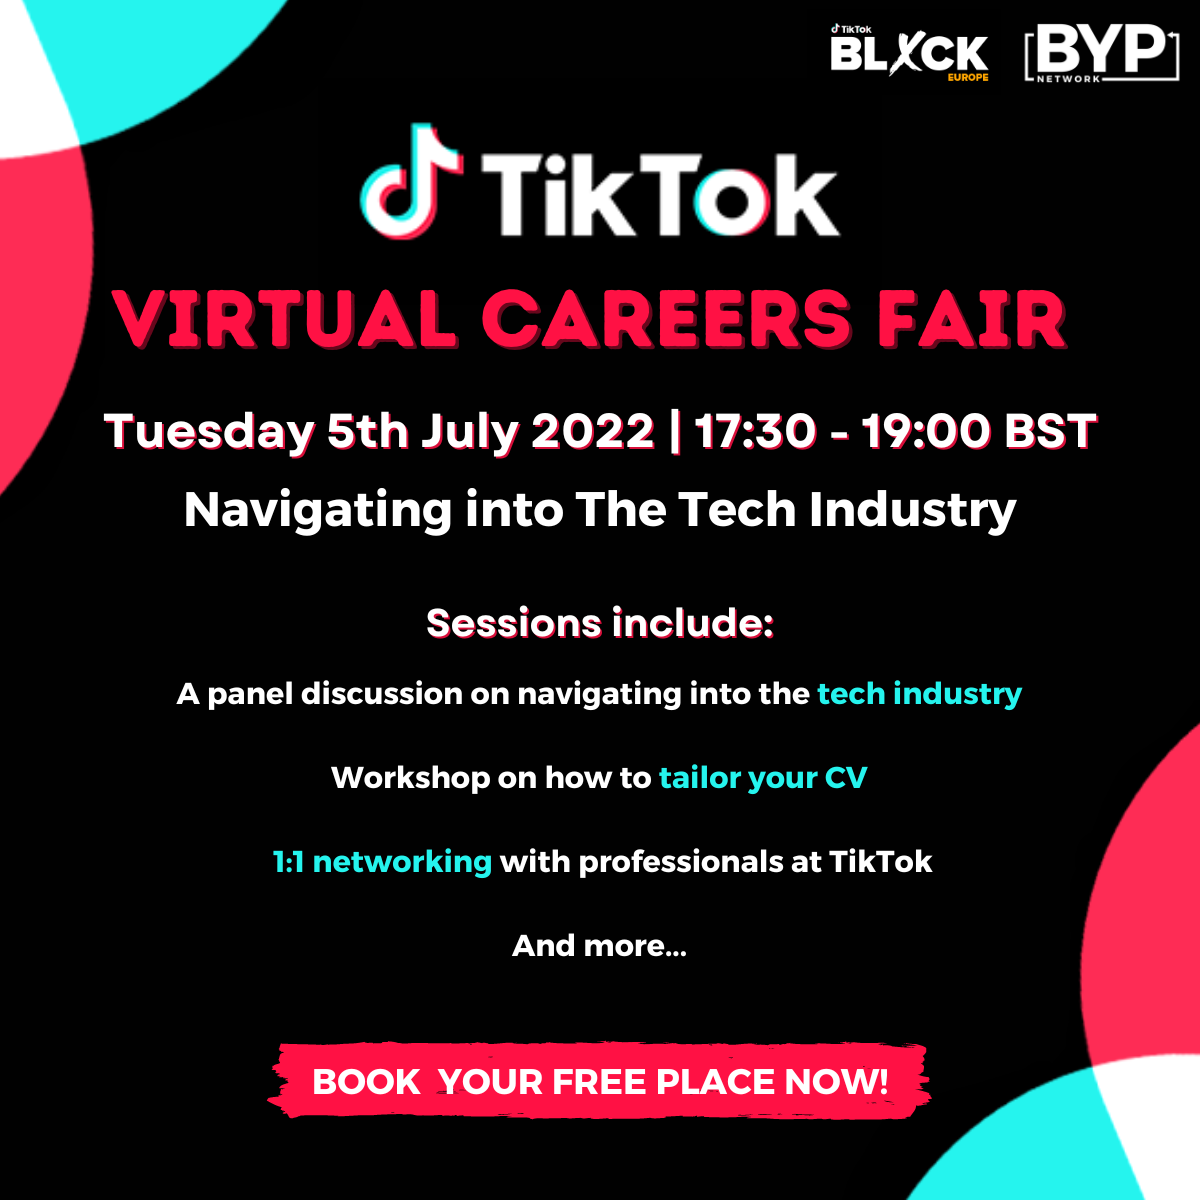 TikTok Virtual Careers Fair: Navigating into The Tech Industry - BYP Network